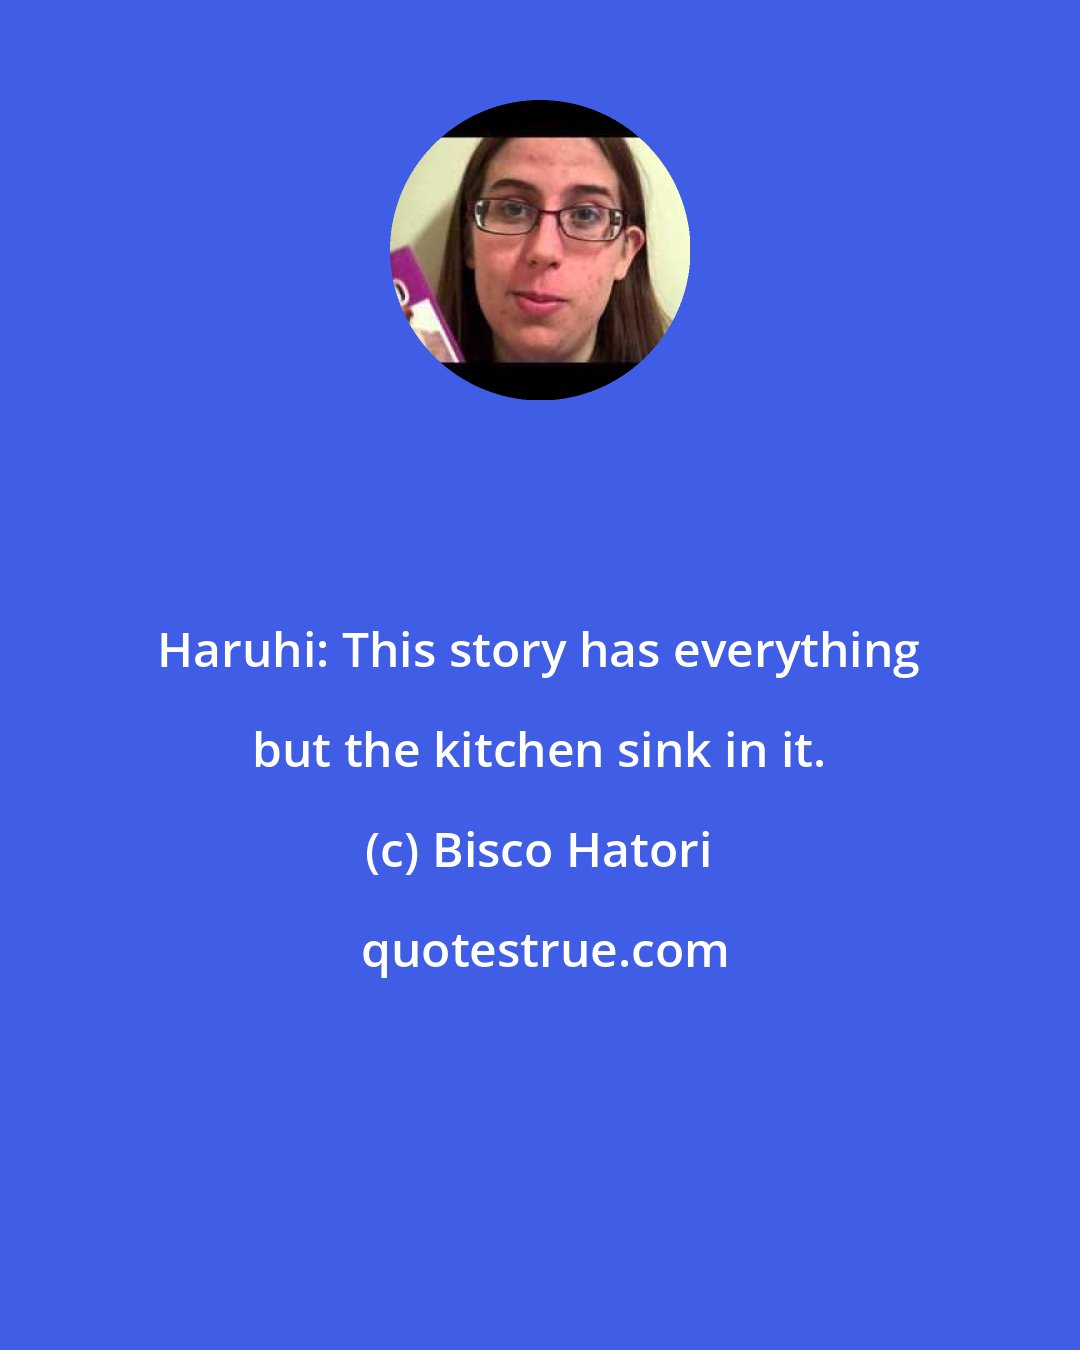 Bisco Hatori: Haruhi: This story has everything but the kitchen sink in it.